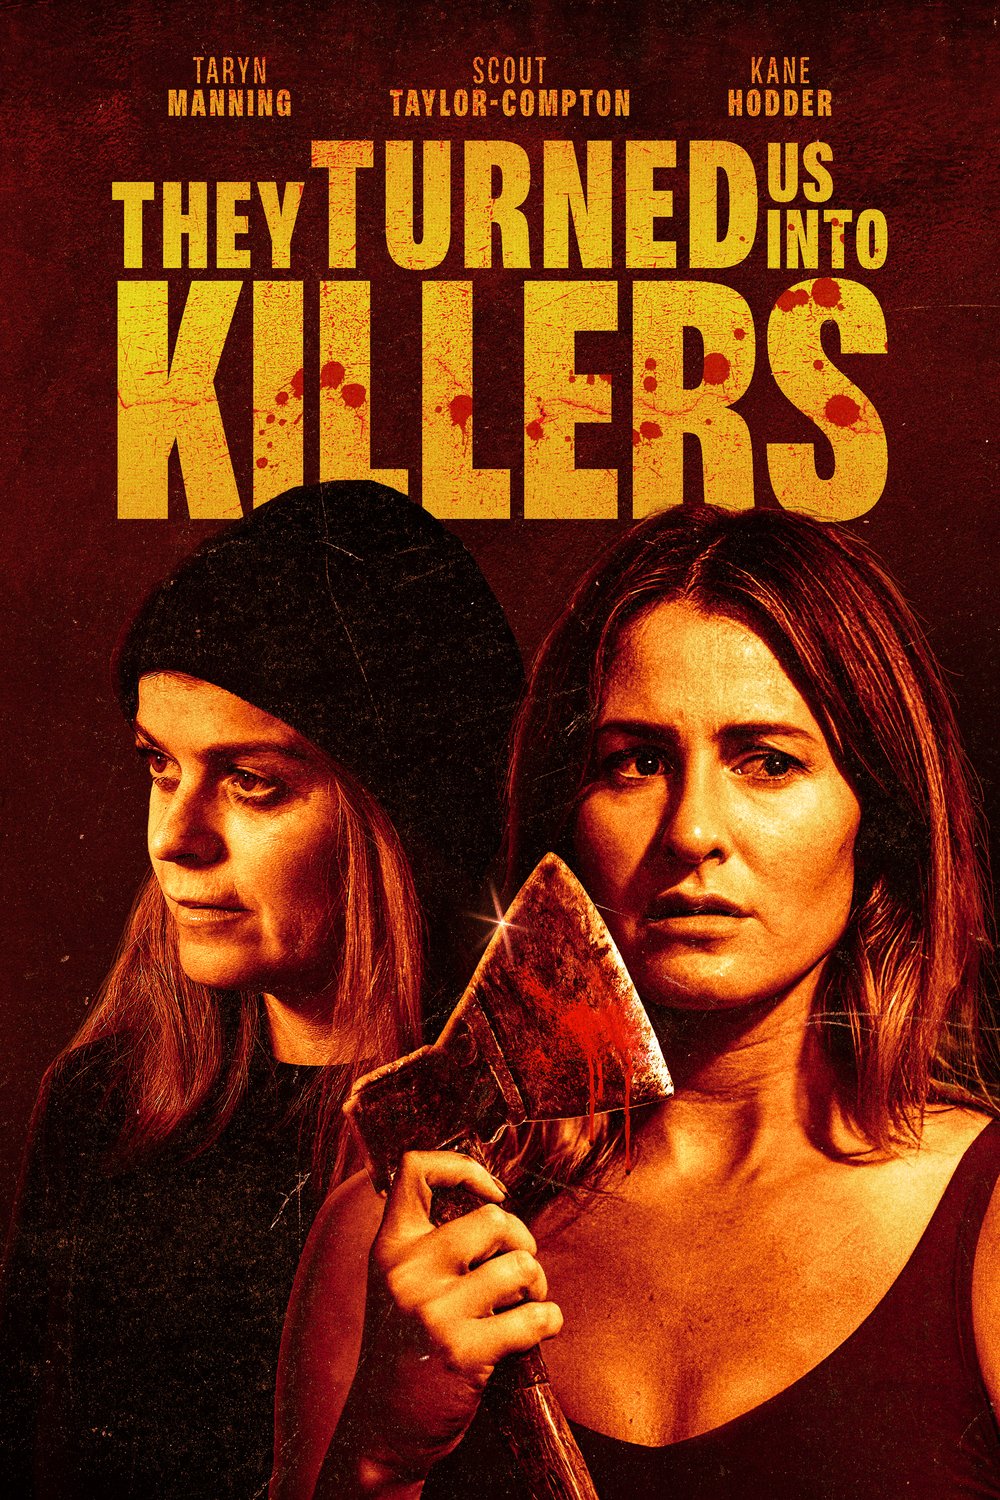 Poster of the movie They Turned Us Into Killers